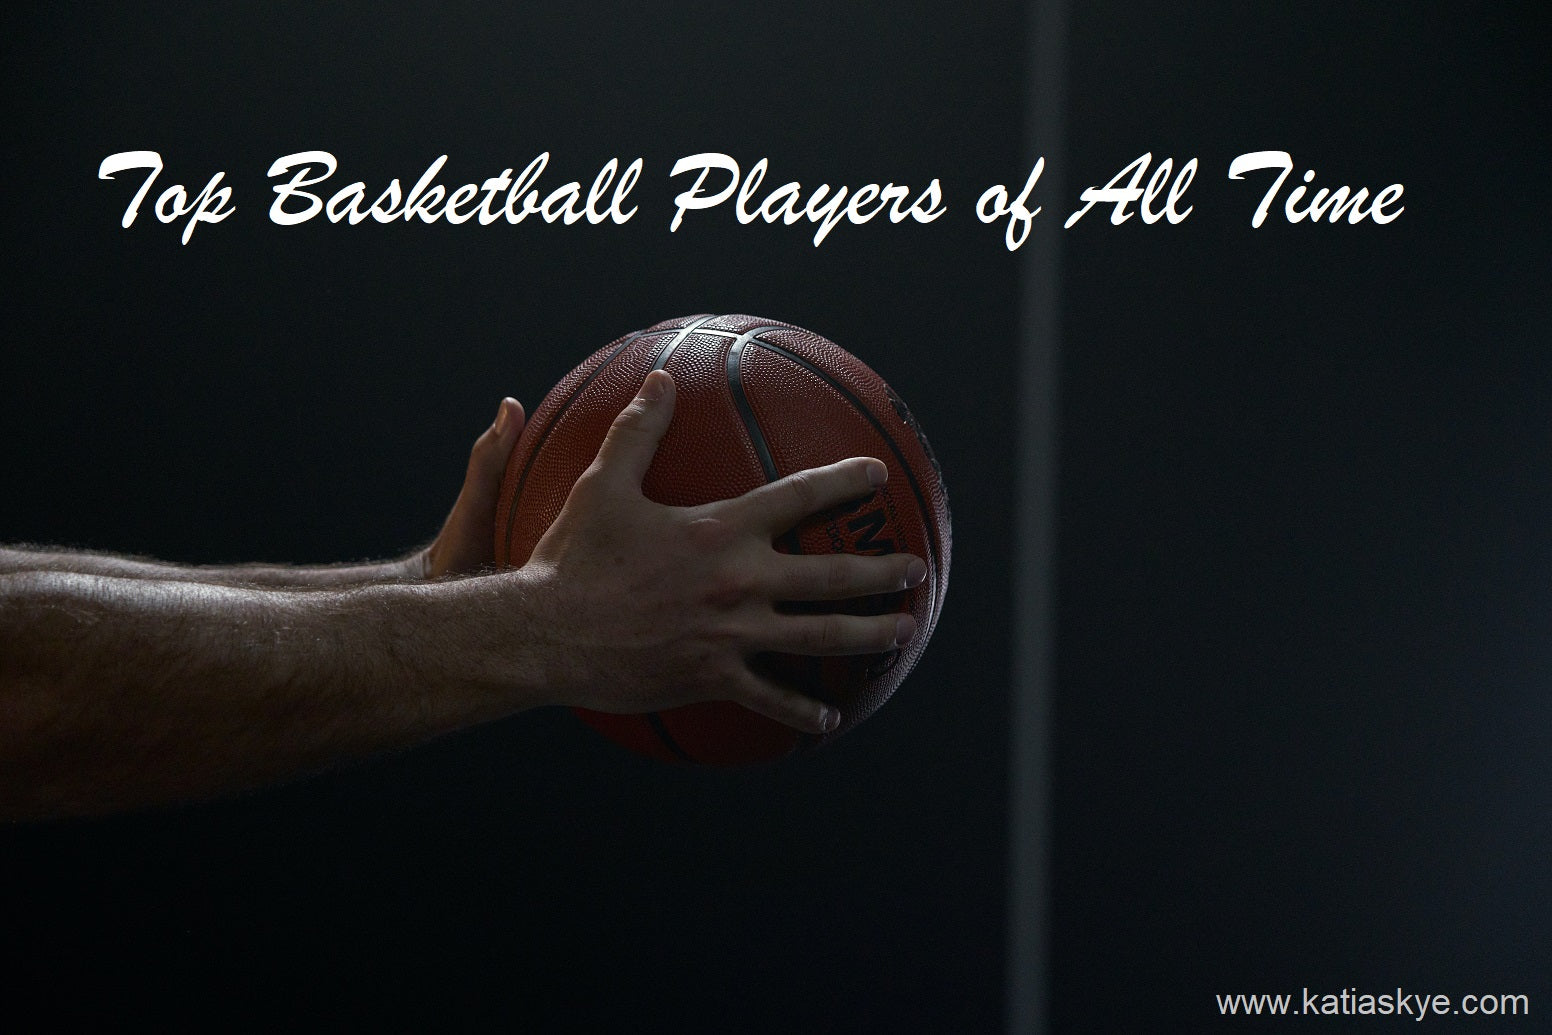 From Jordan to LeBron: Honoring the Top Basketball Players of All Time